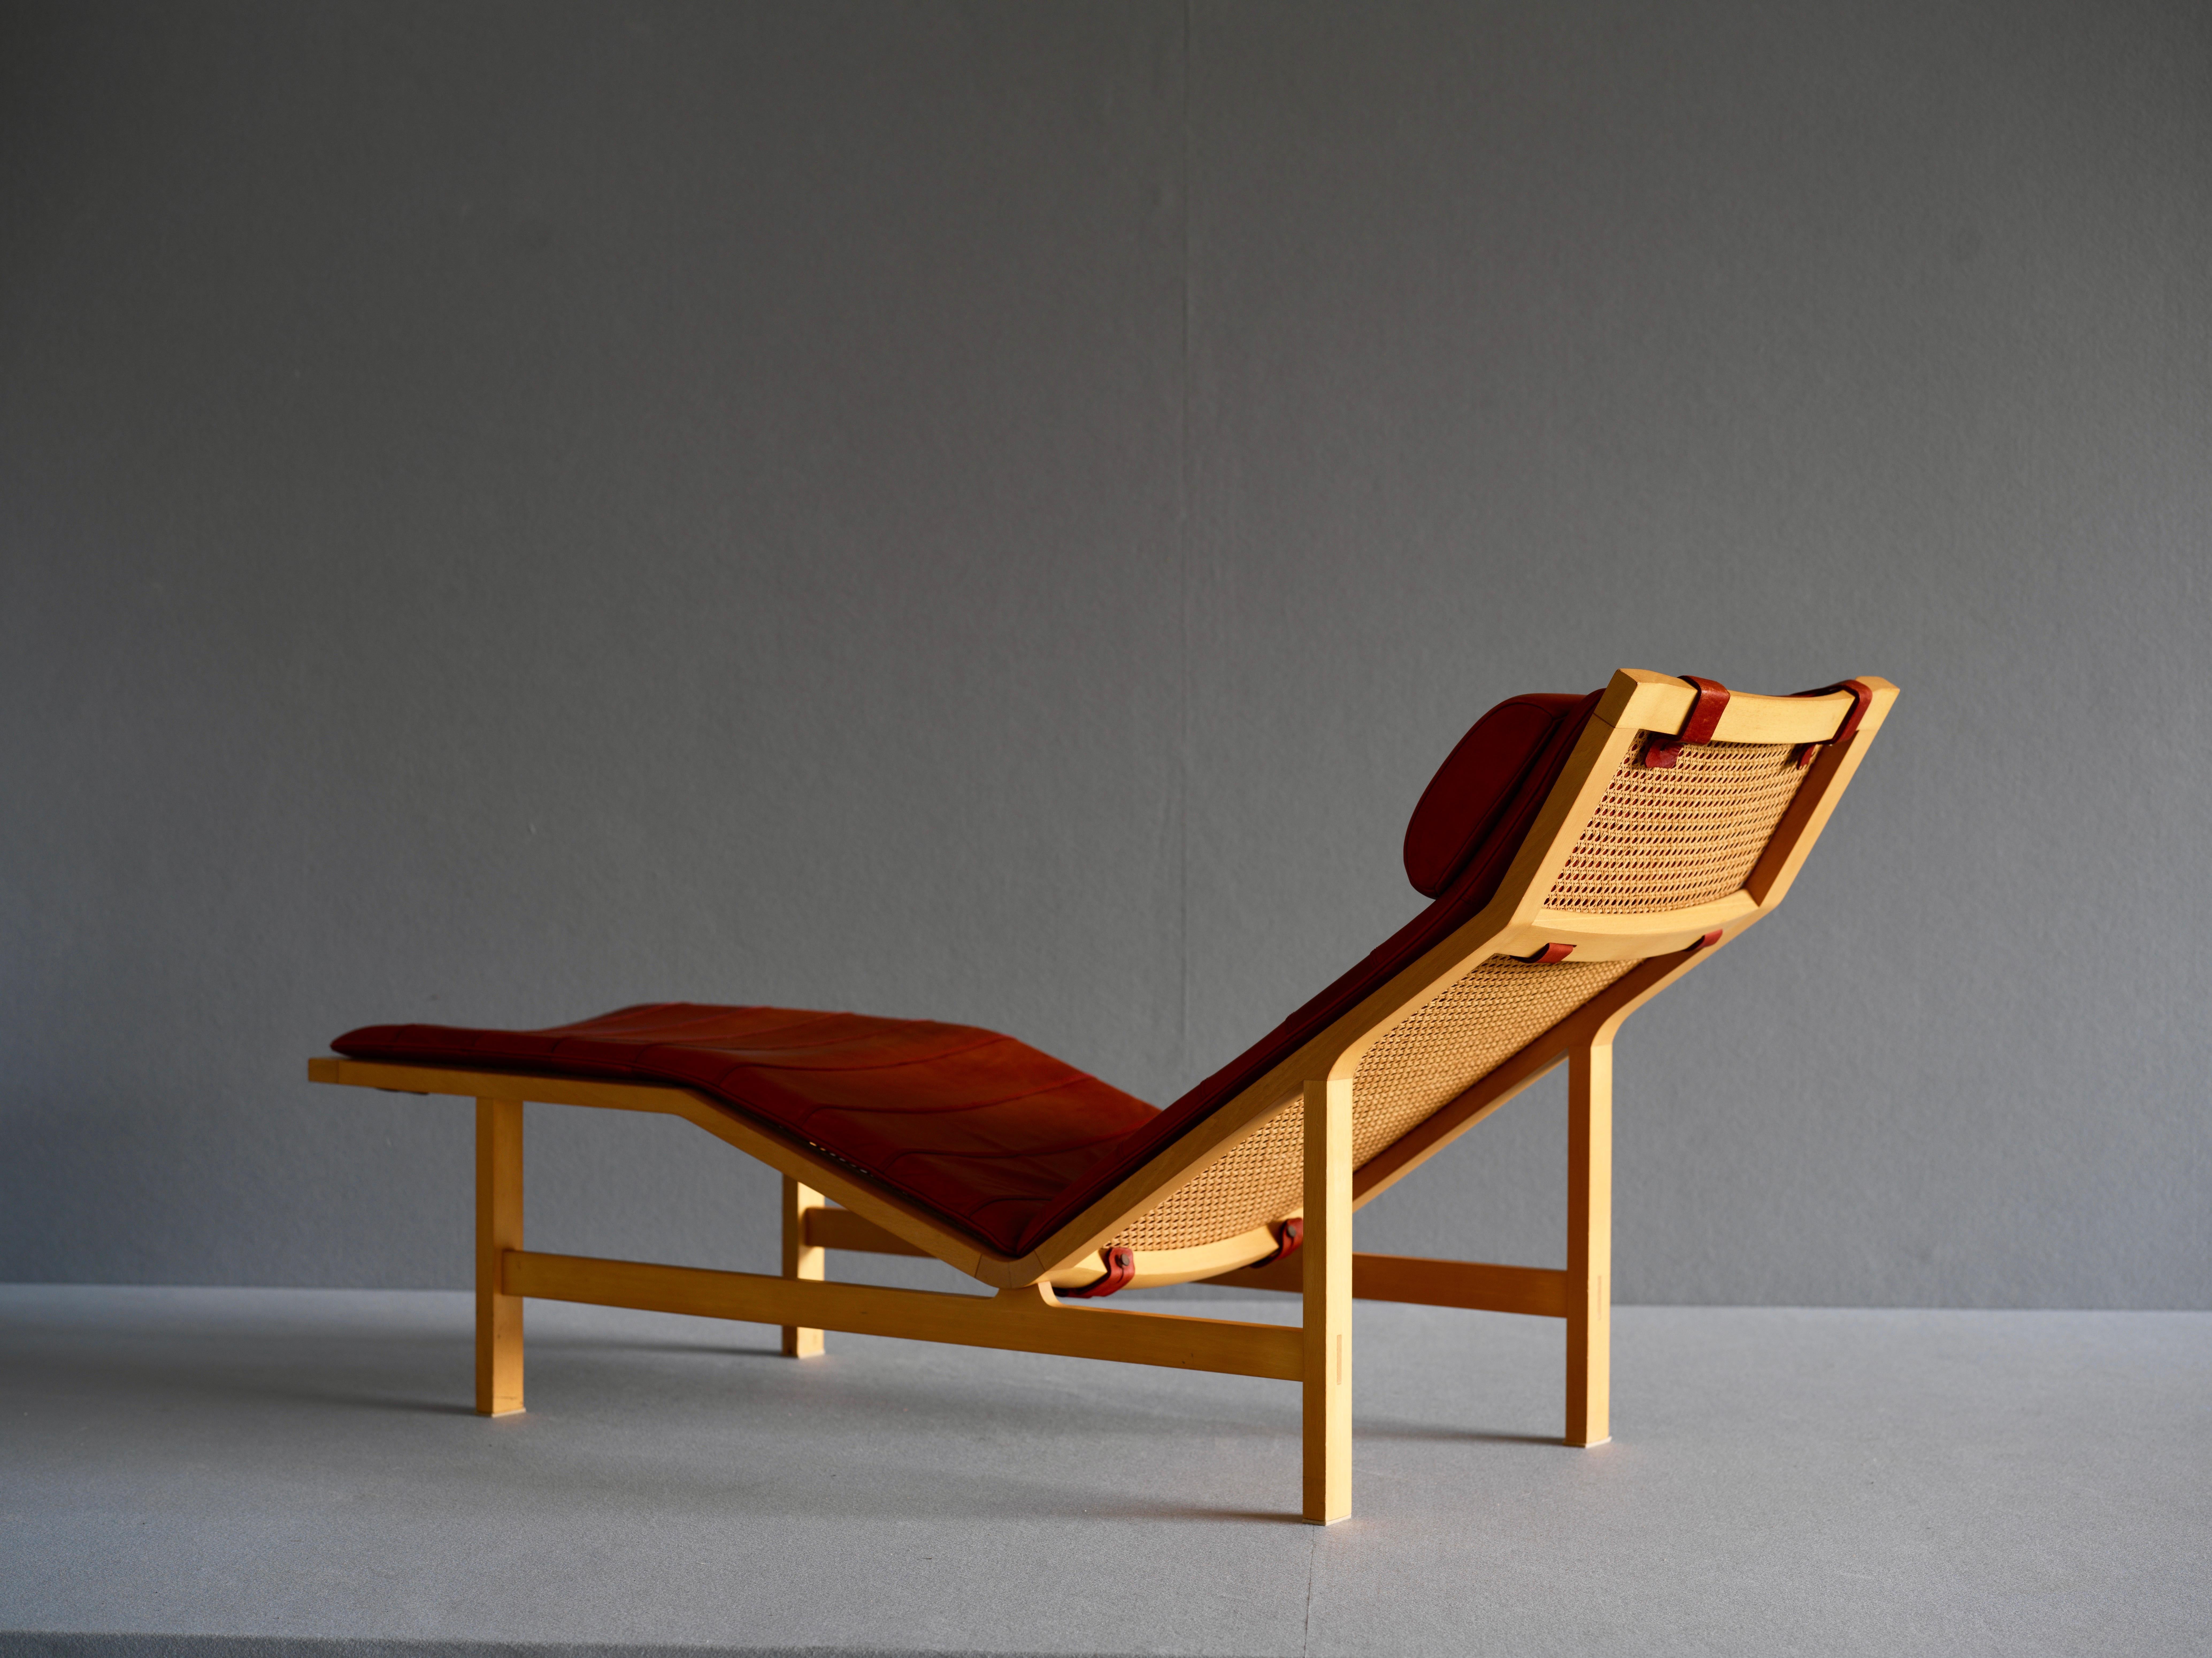 Chaise lounge by Rud Thygesen and Johnny Sorensen. This is known as the “Escape Chair”. It is in solid ash and has a back and seat in French wicker. The cushion and headrest is upholstered in brown leather.

 